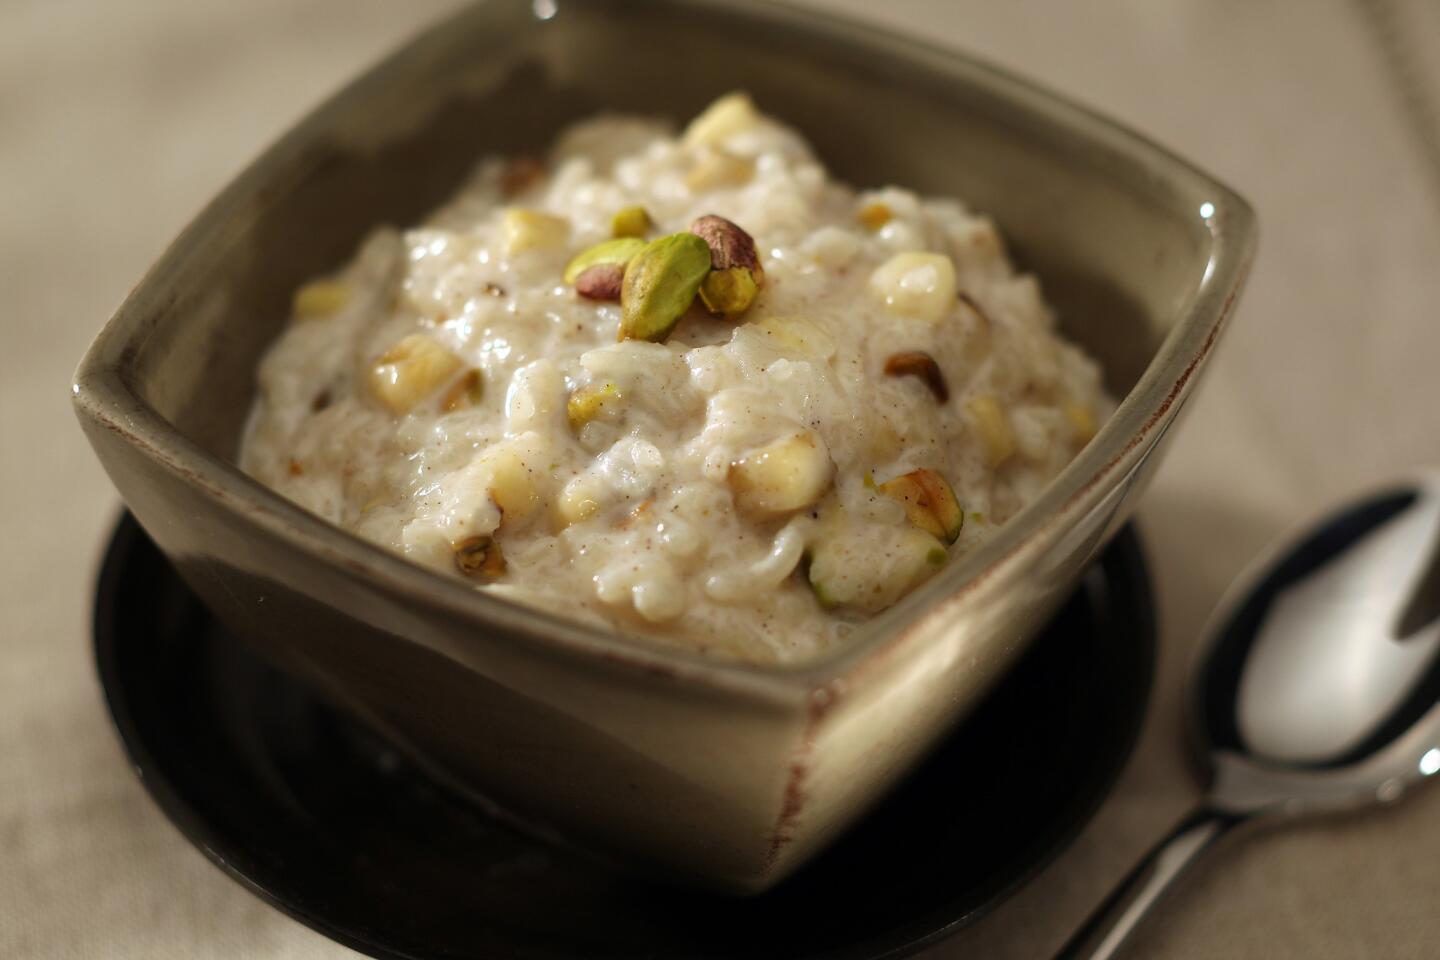 Chilled banana and pistachio rice pudding